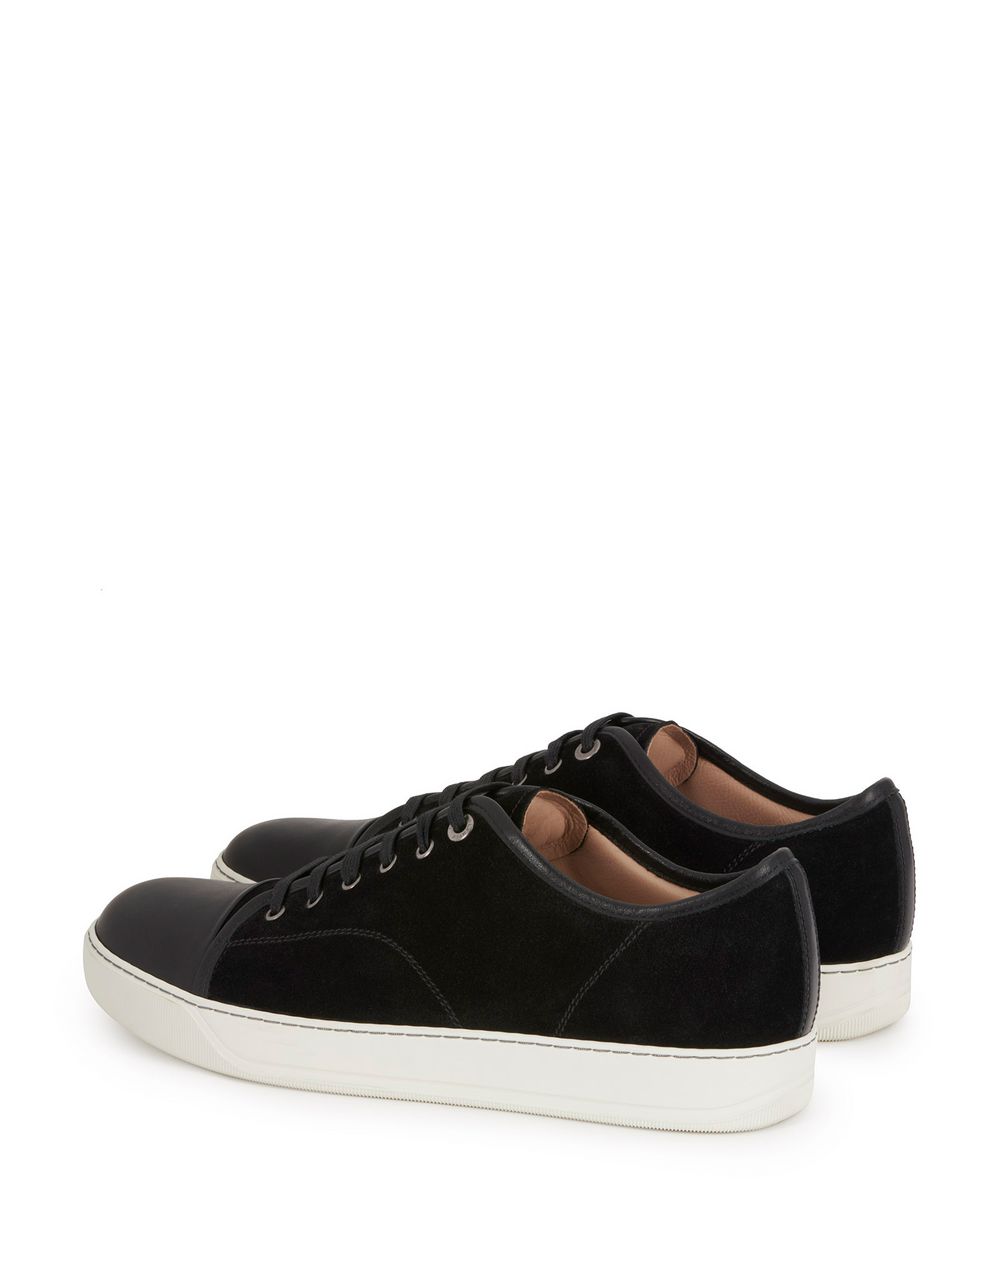 Lanvin DBB1 SUEDE AND LEATHER SNEAKERS, Sneakers Men | Lanvin Online Store